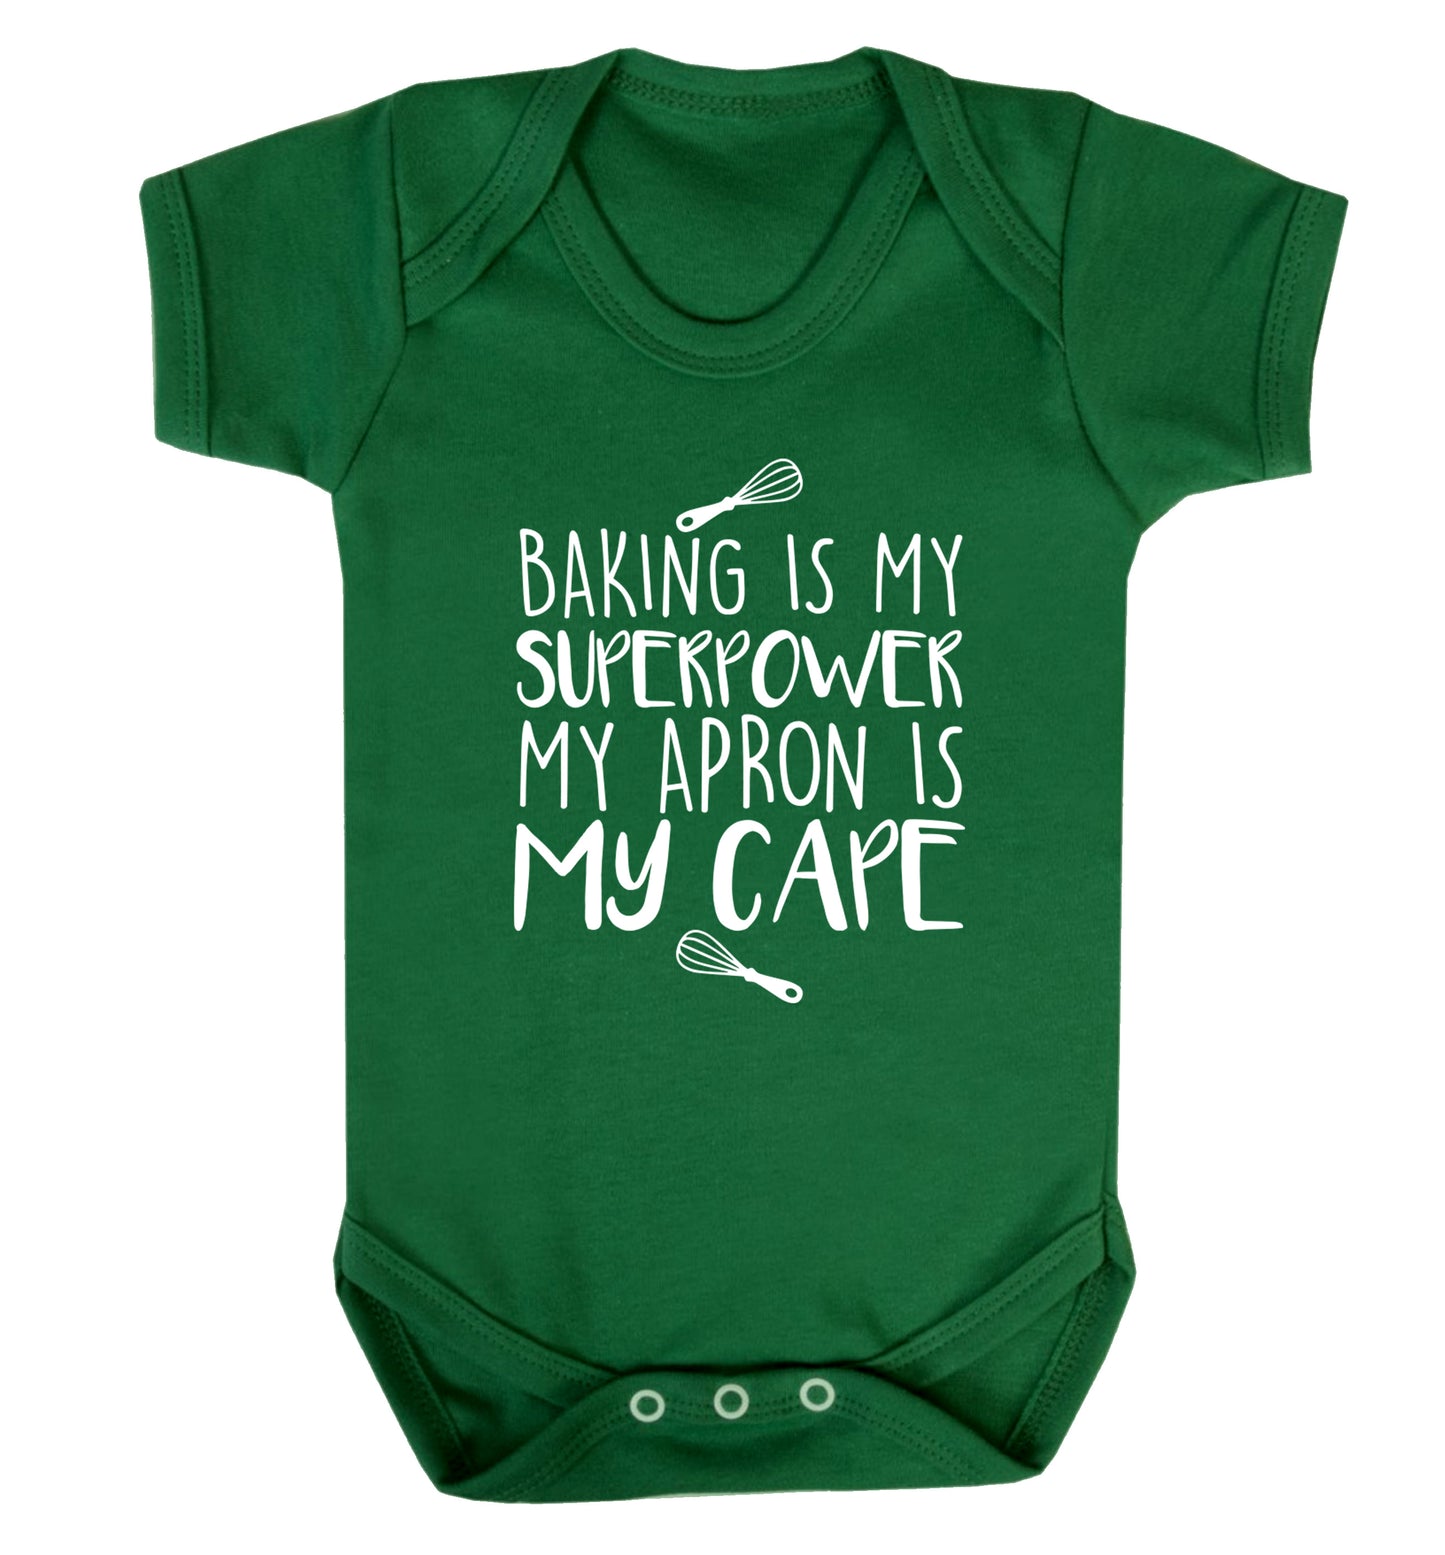 Baking is my superpower my apron is my cape Baby Vest green 18-24 months